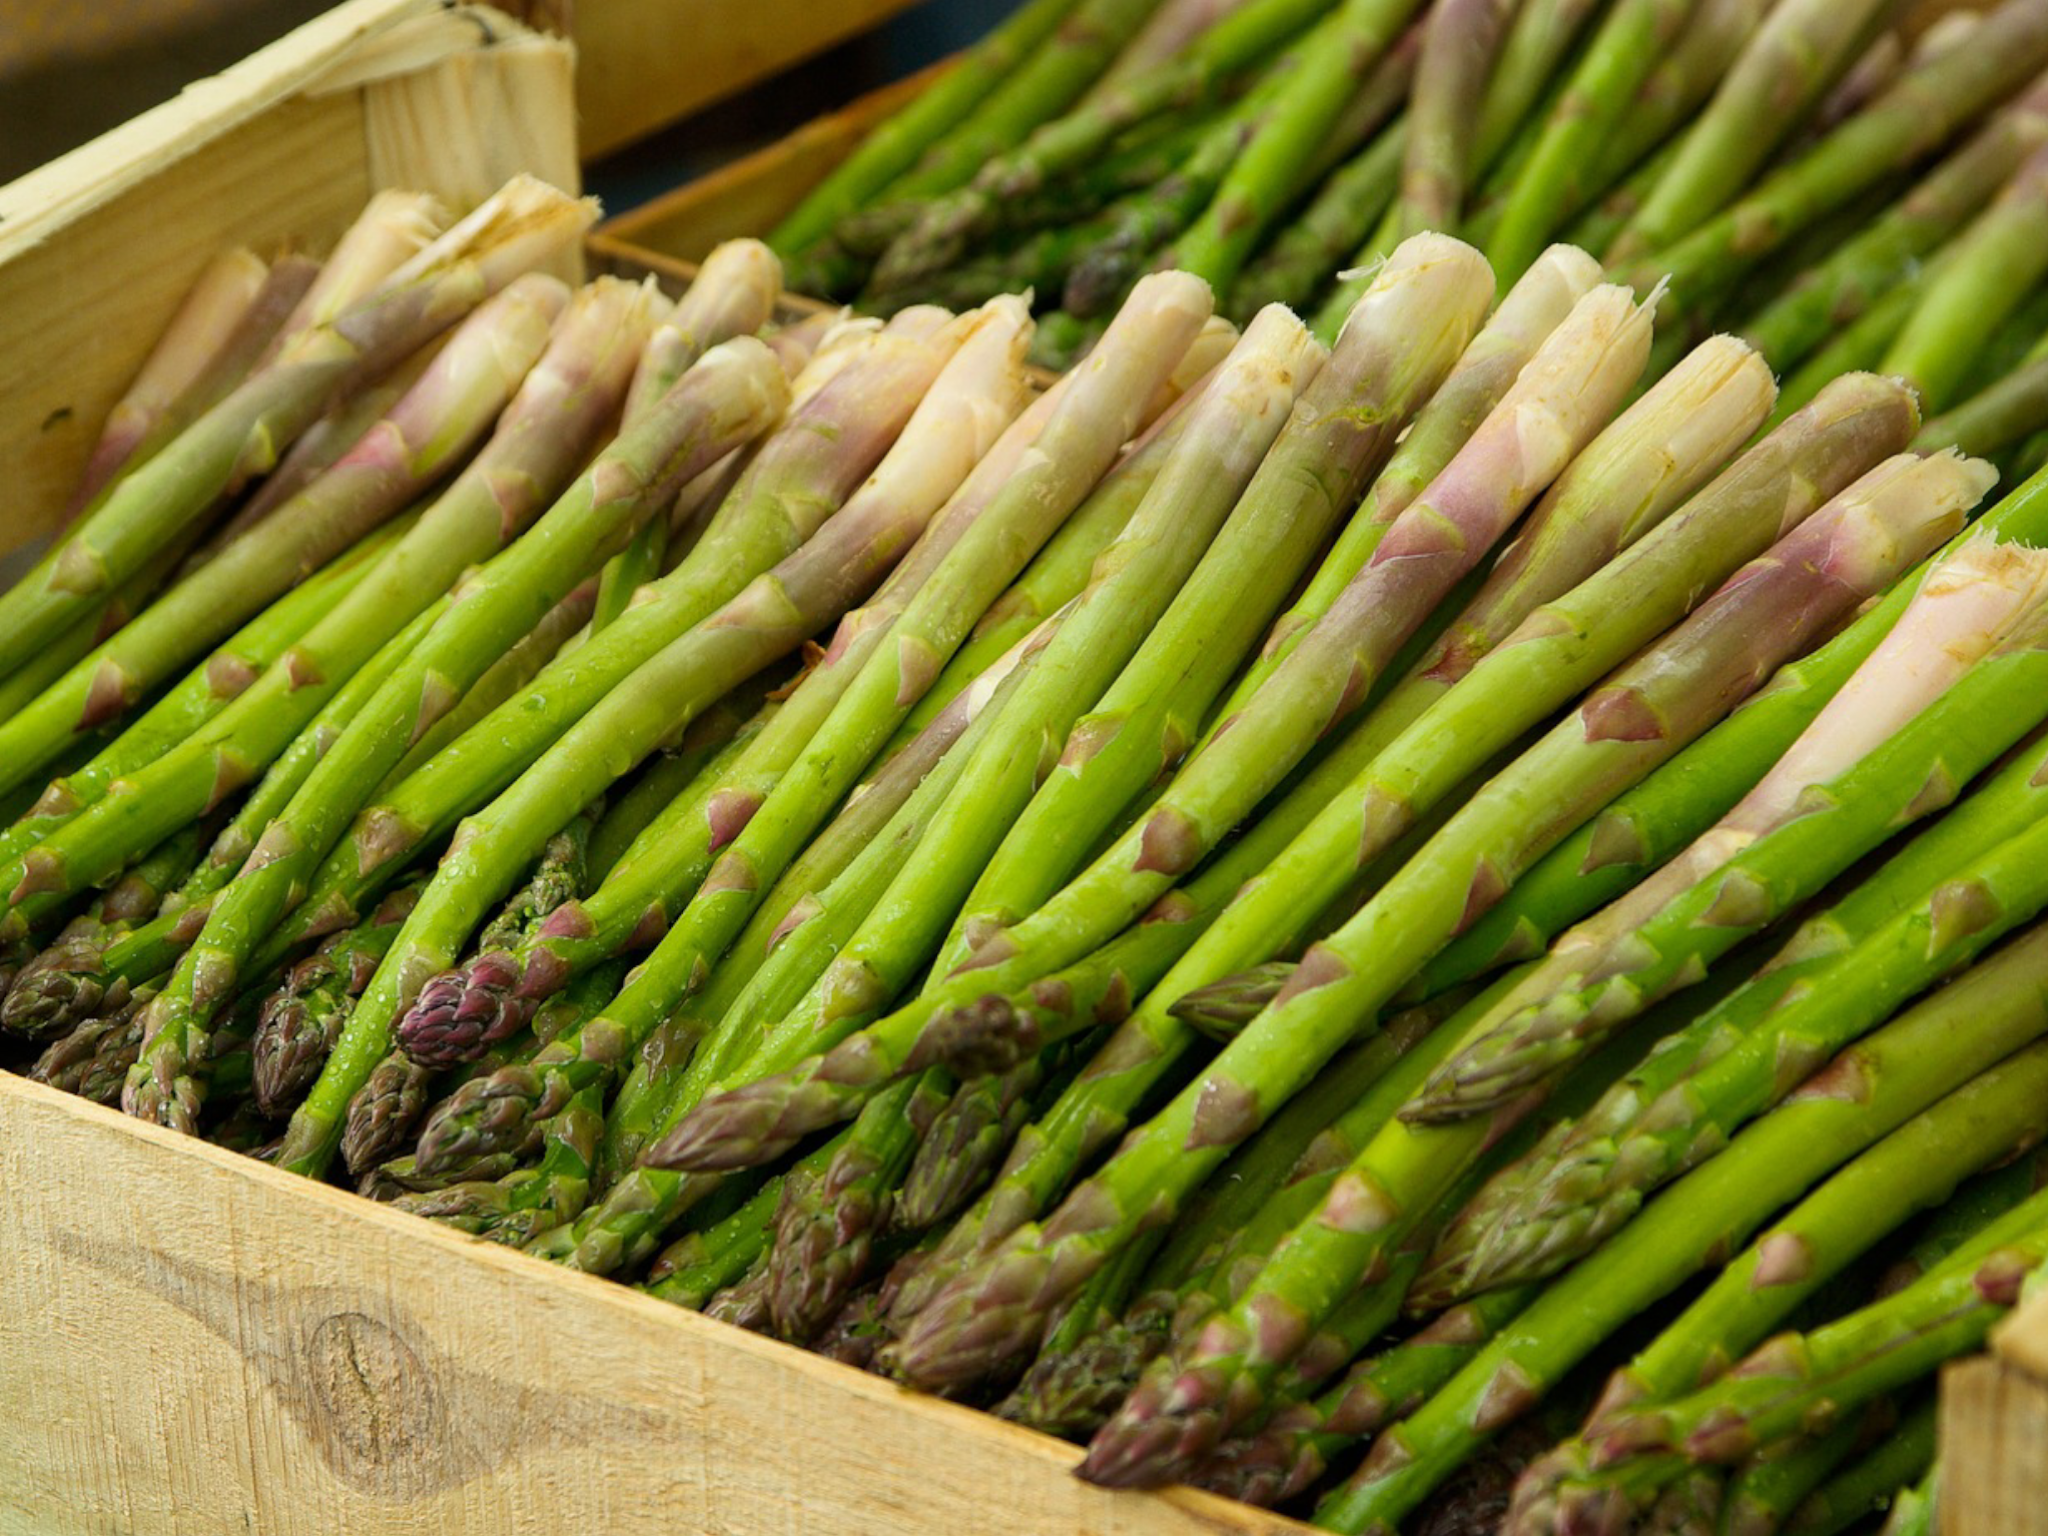 Demand for asparagus year-round has made this healthy veggie one that isn't as planet friendly as you'd think.